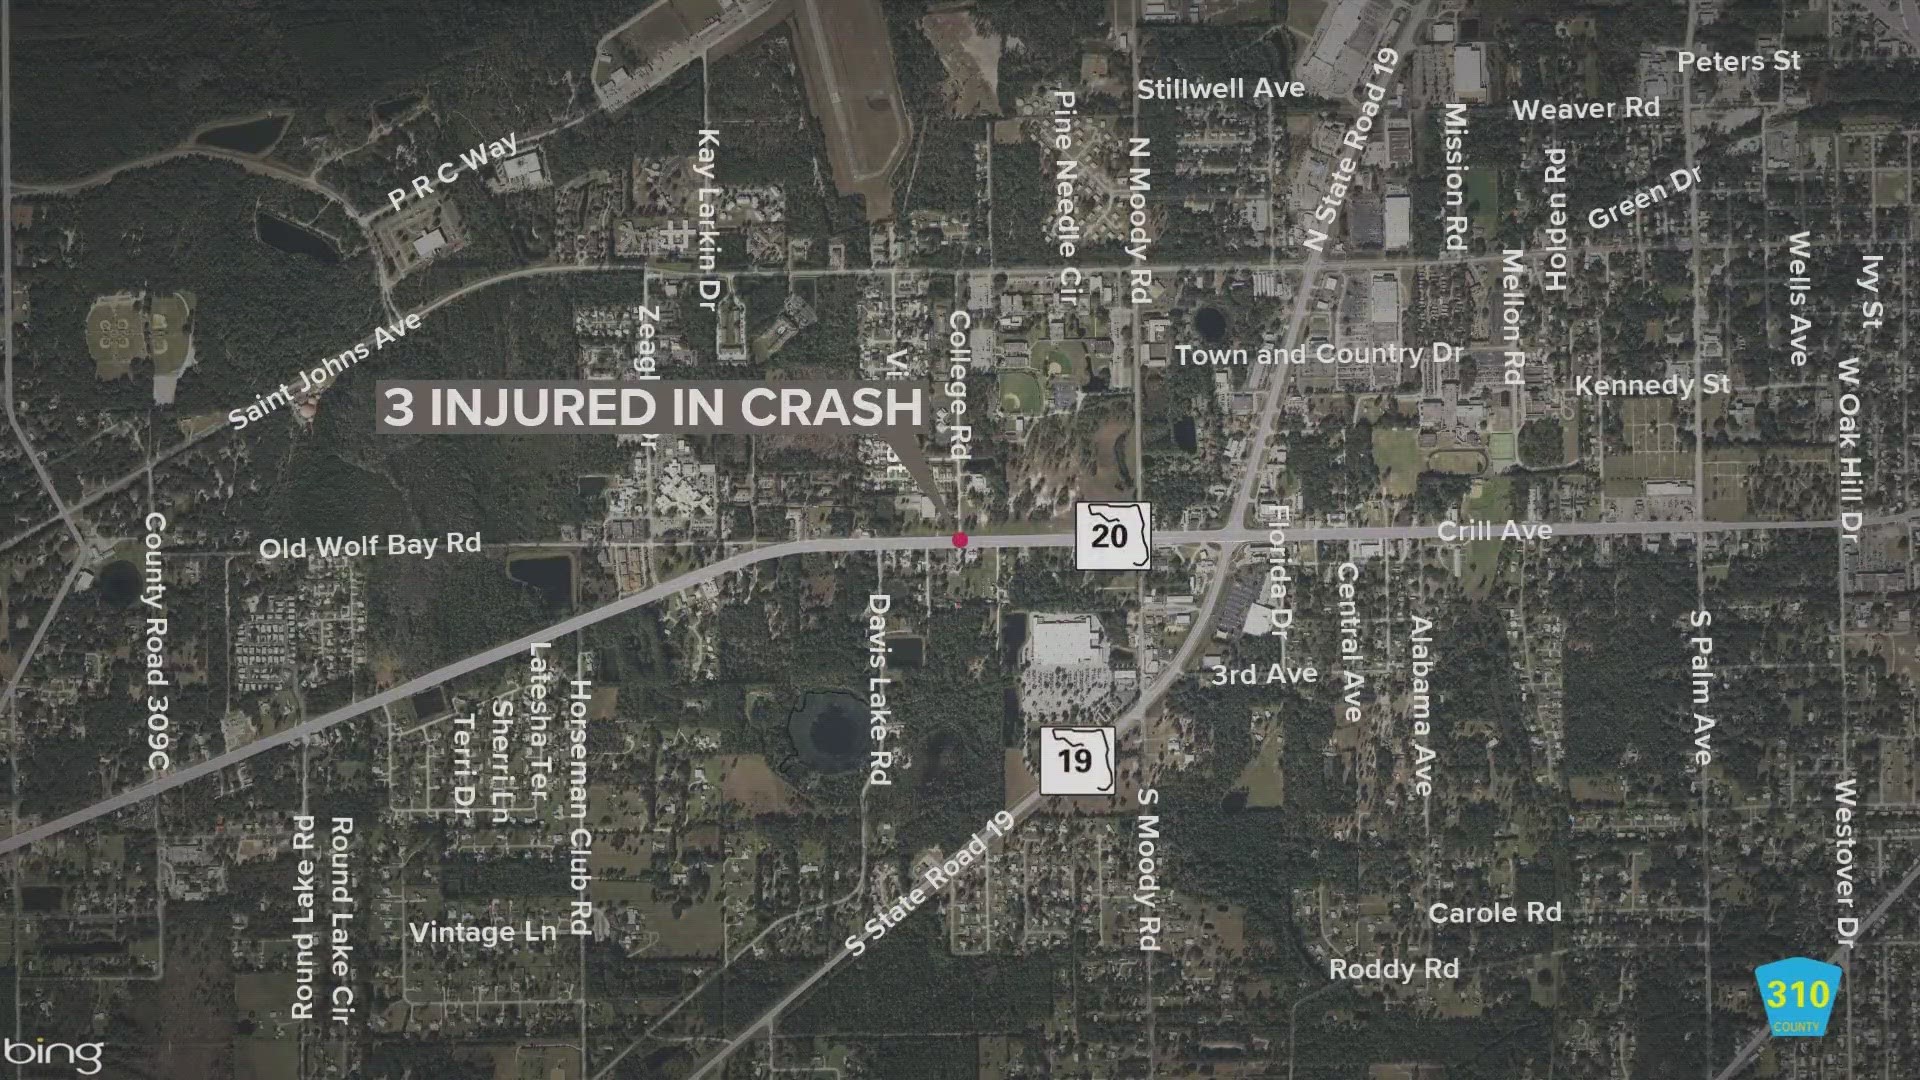 The crash occurred around 8:30 p.m. Saturday near College Road and it required a life flight.